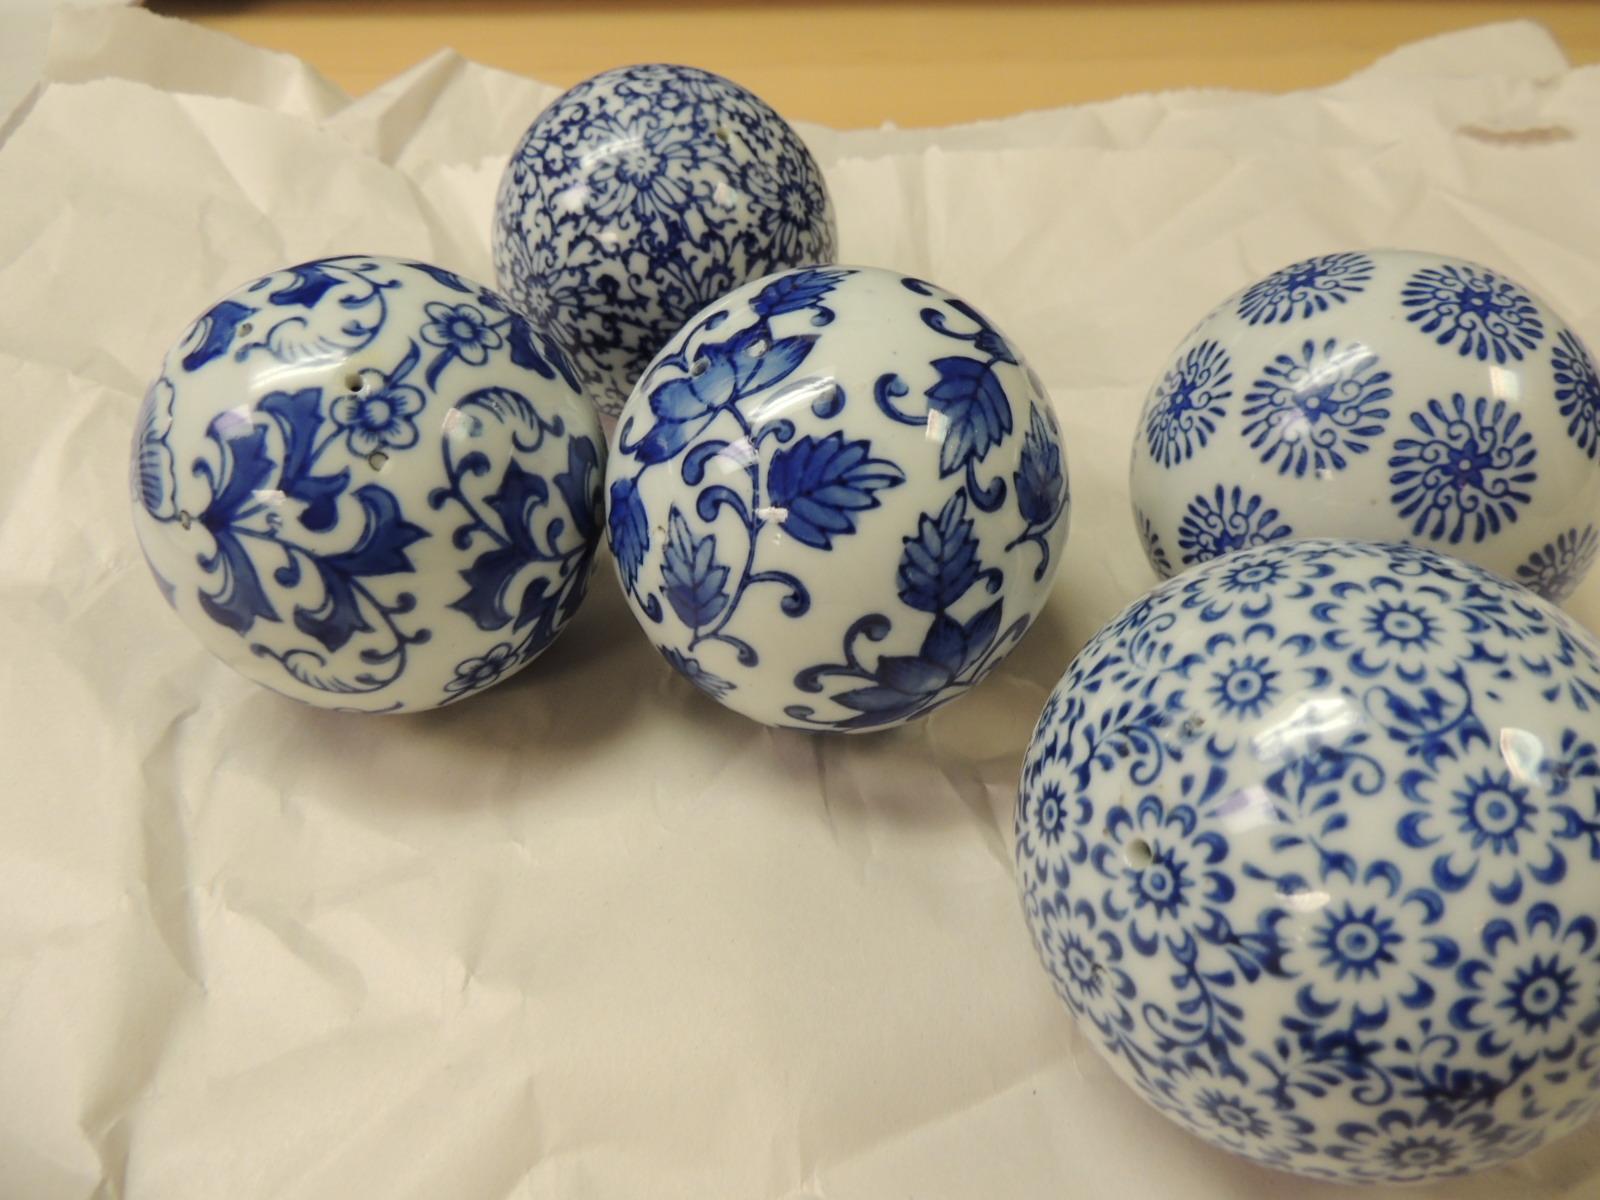 Blue and white ceramic balls
Blue and white ceramic balls with flowers, stars and vines
Measures: 3